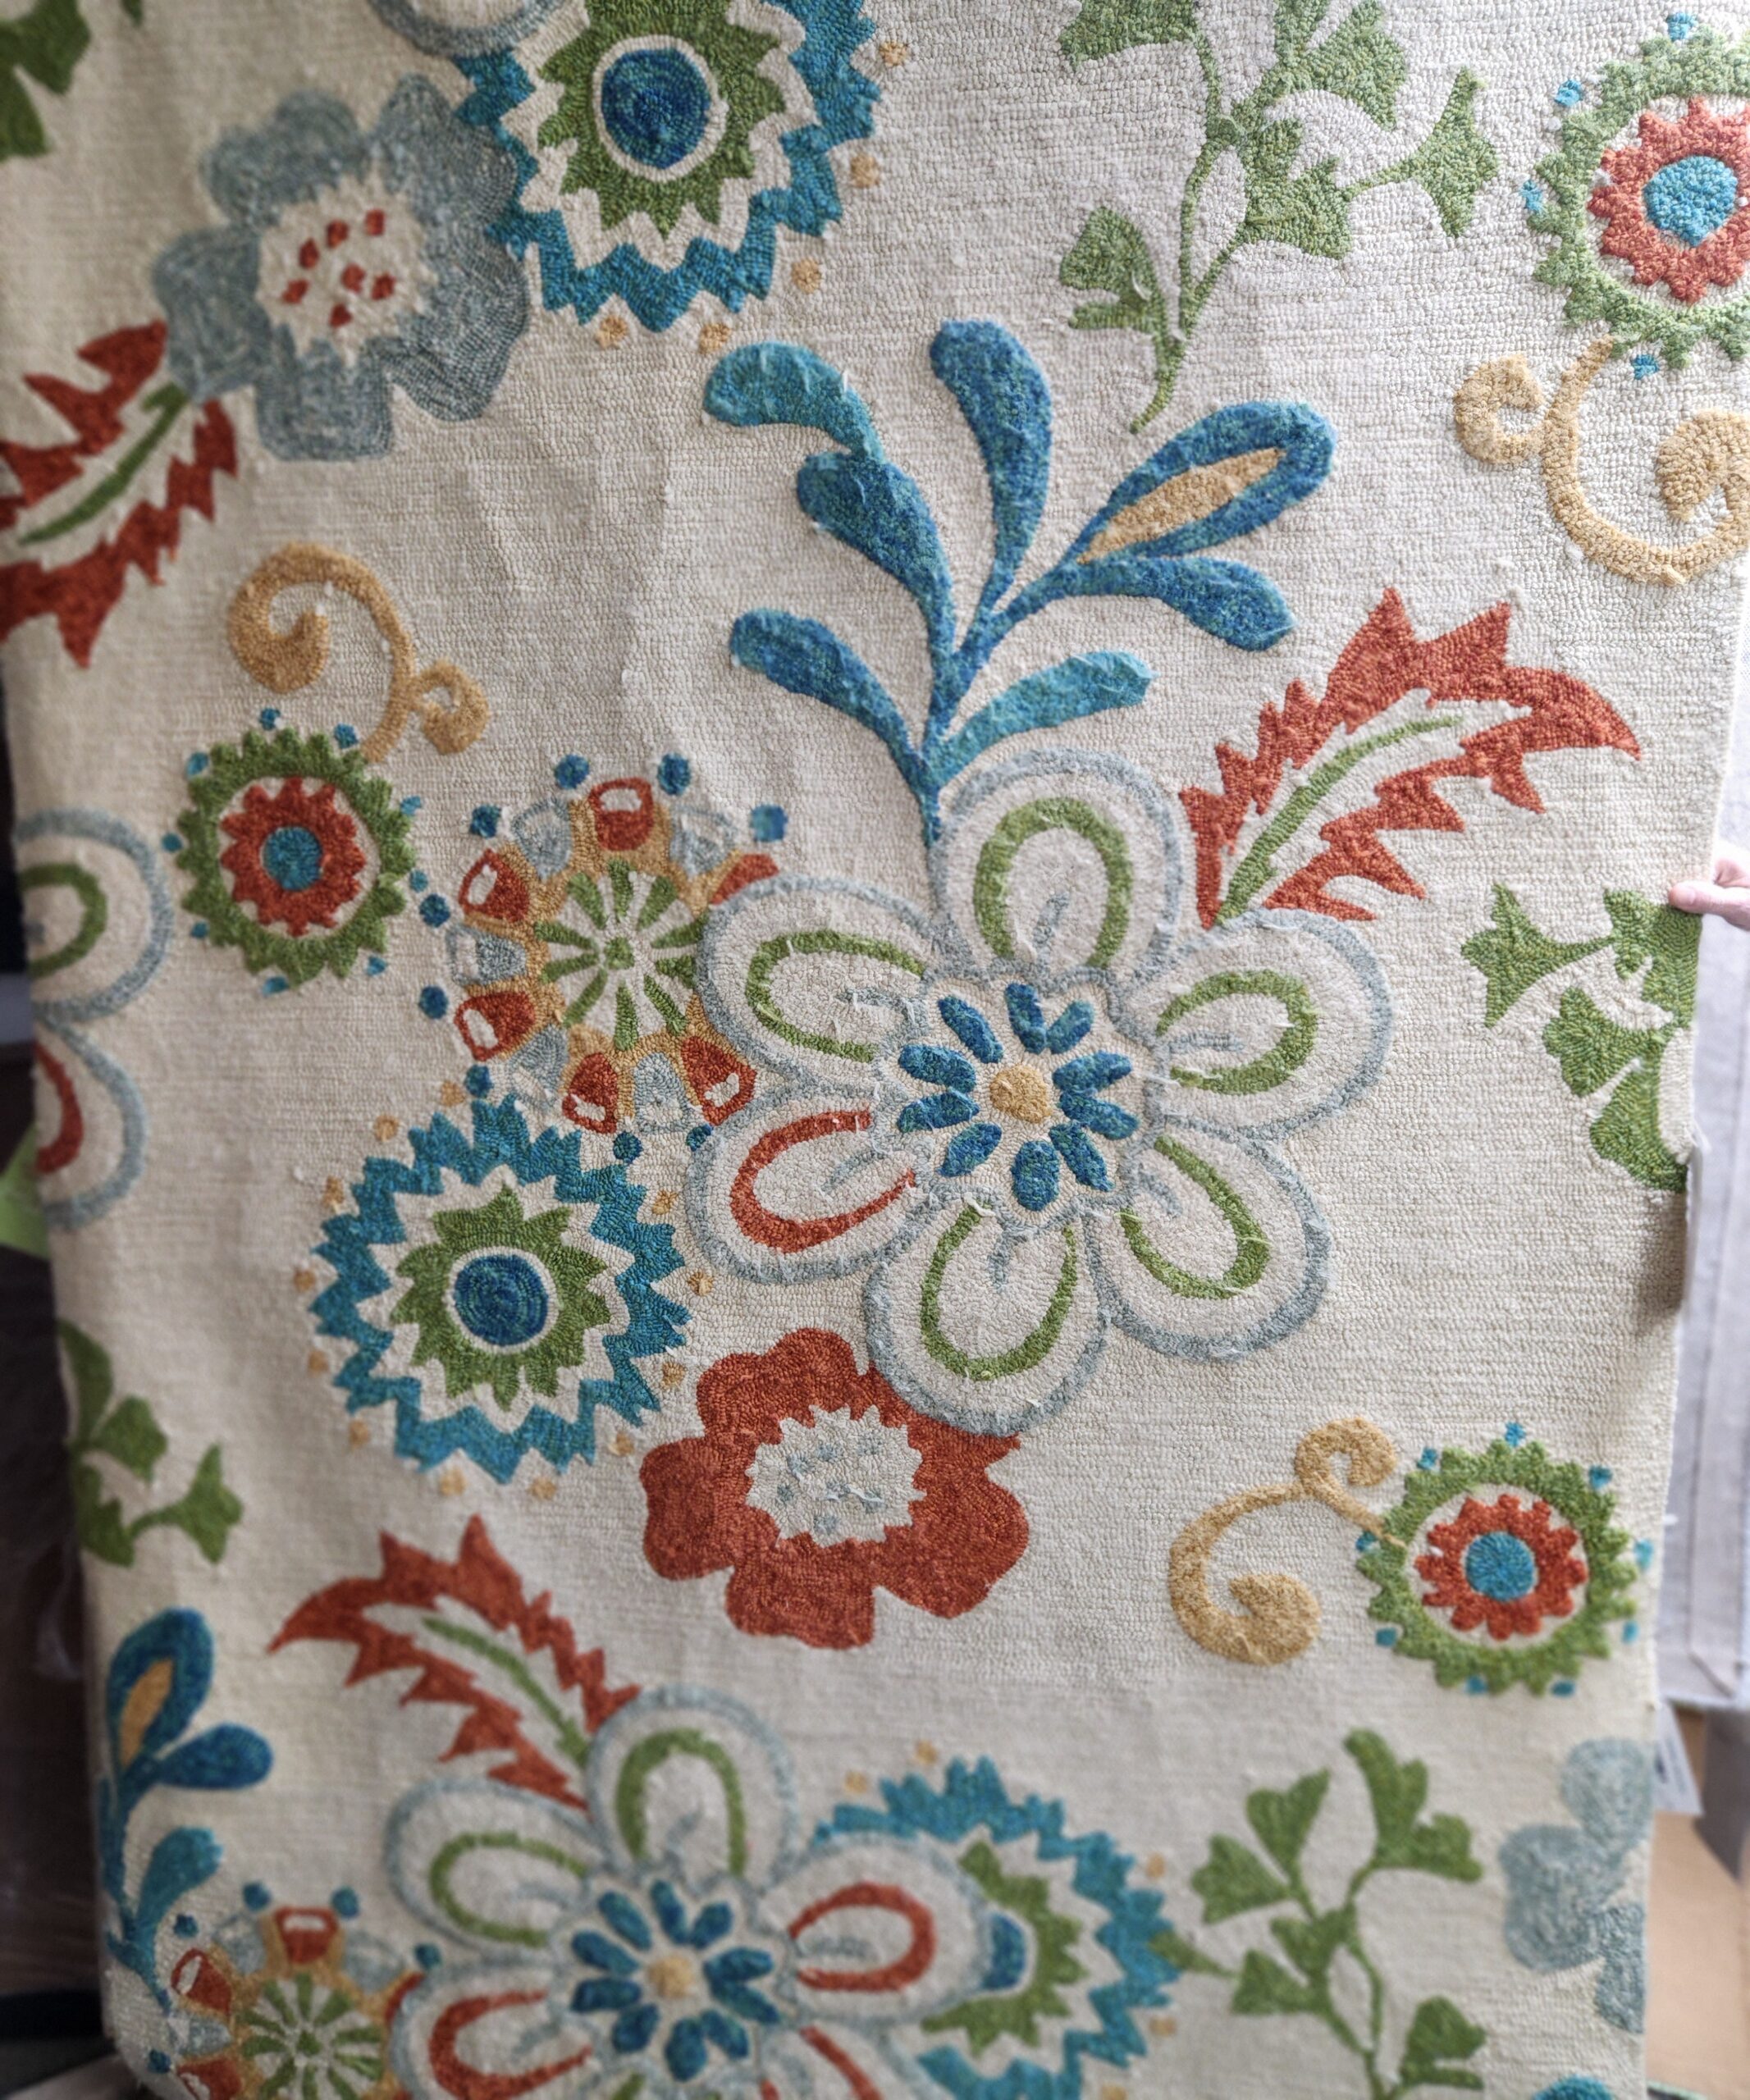 a close up of a flowered fabric with many colors